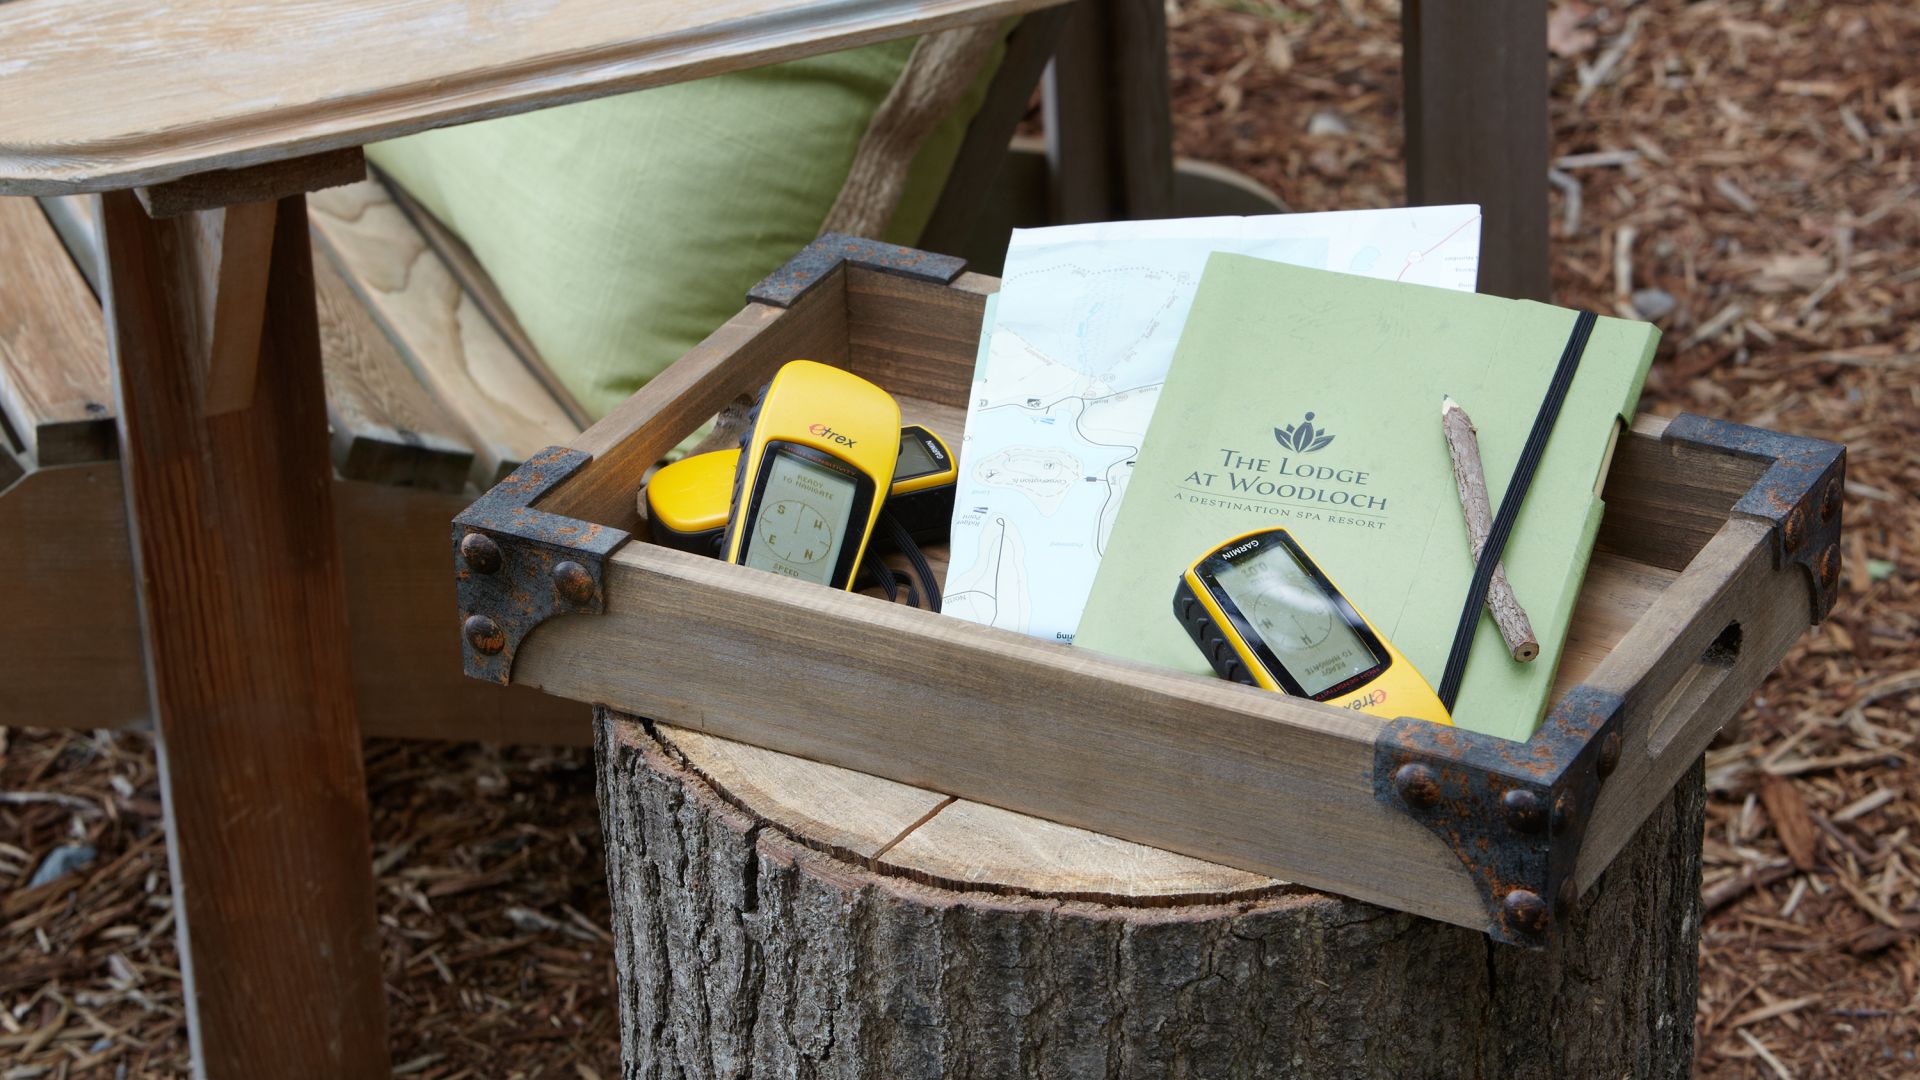 Geocaching equipment sitting next to a Adirondack chair at The Lodge at Woodloch